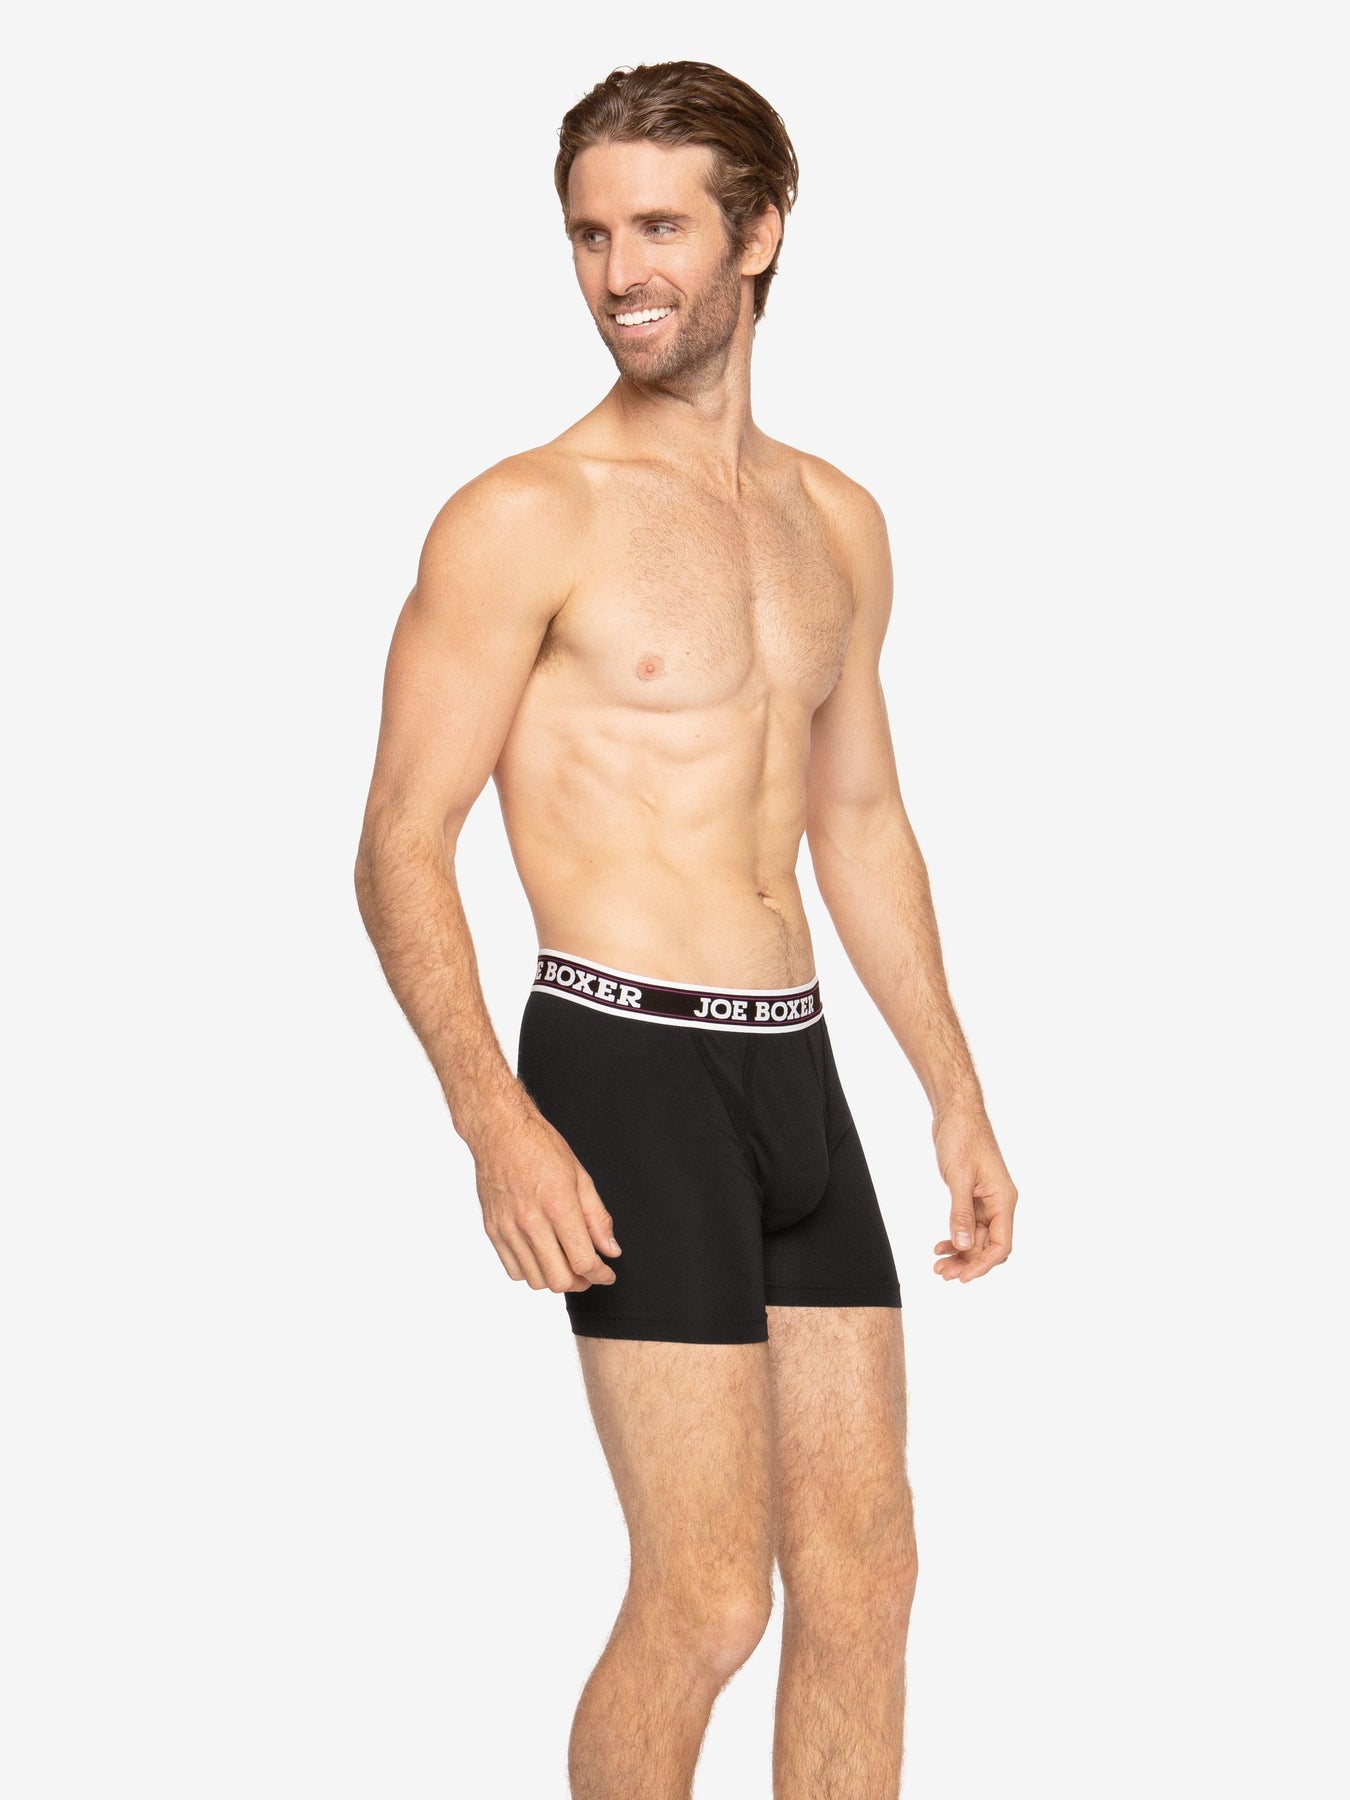 The Boxer Brief 3-Pack